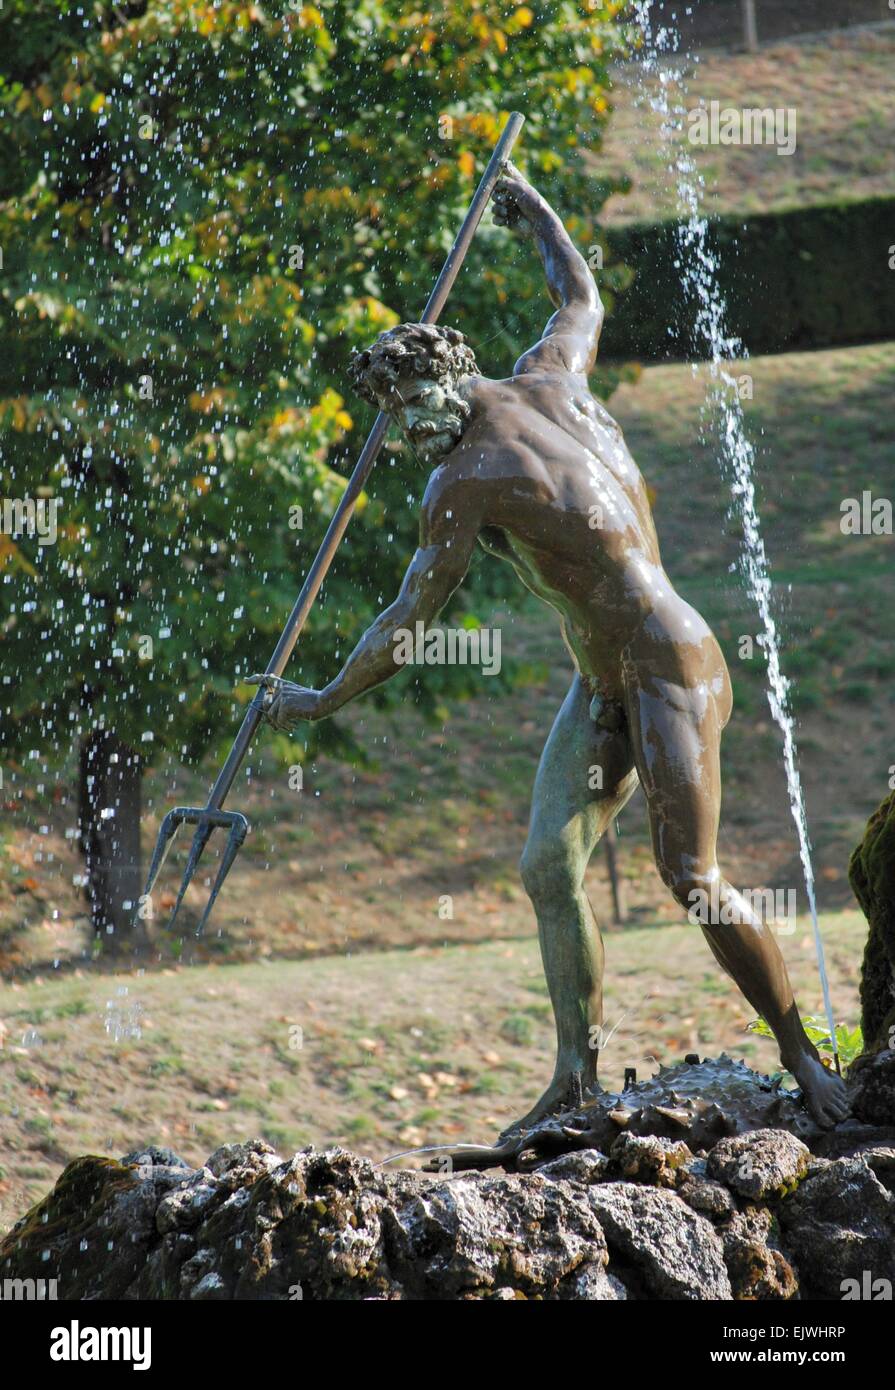 Statue of Neptune with trident in fountain, Boboli Gardens Sculpture Park, Florence, Italy. Stock Photo